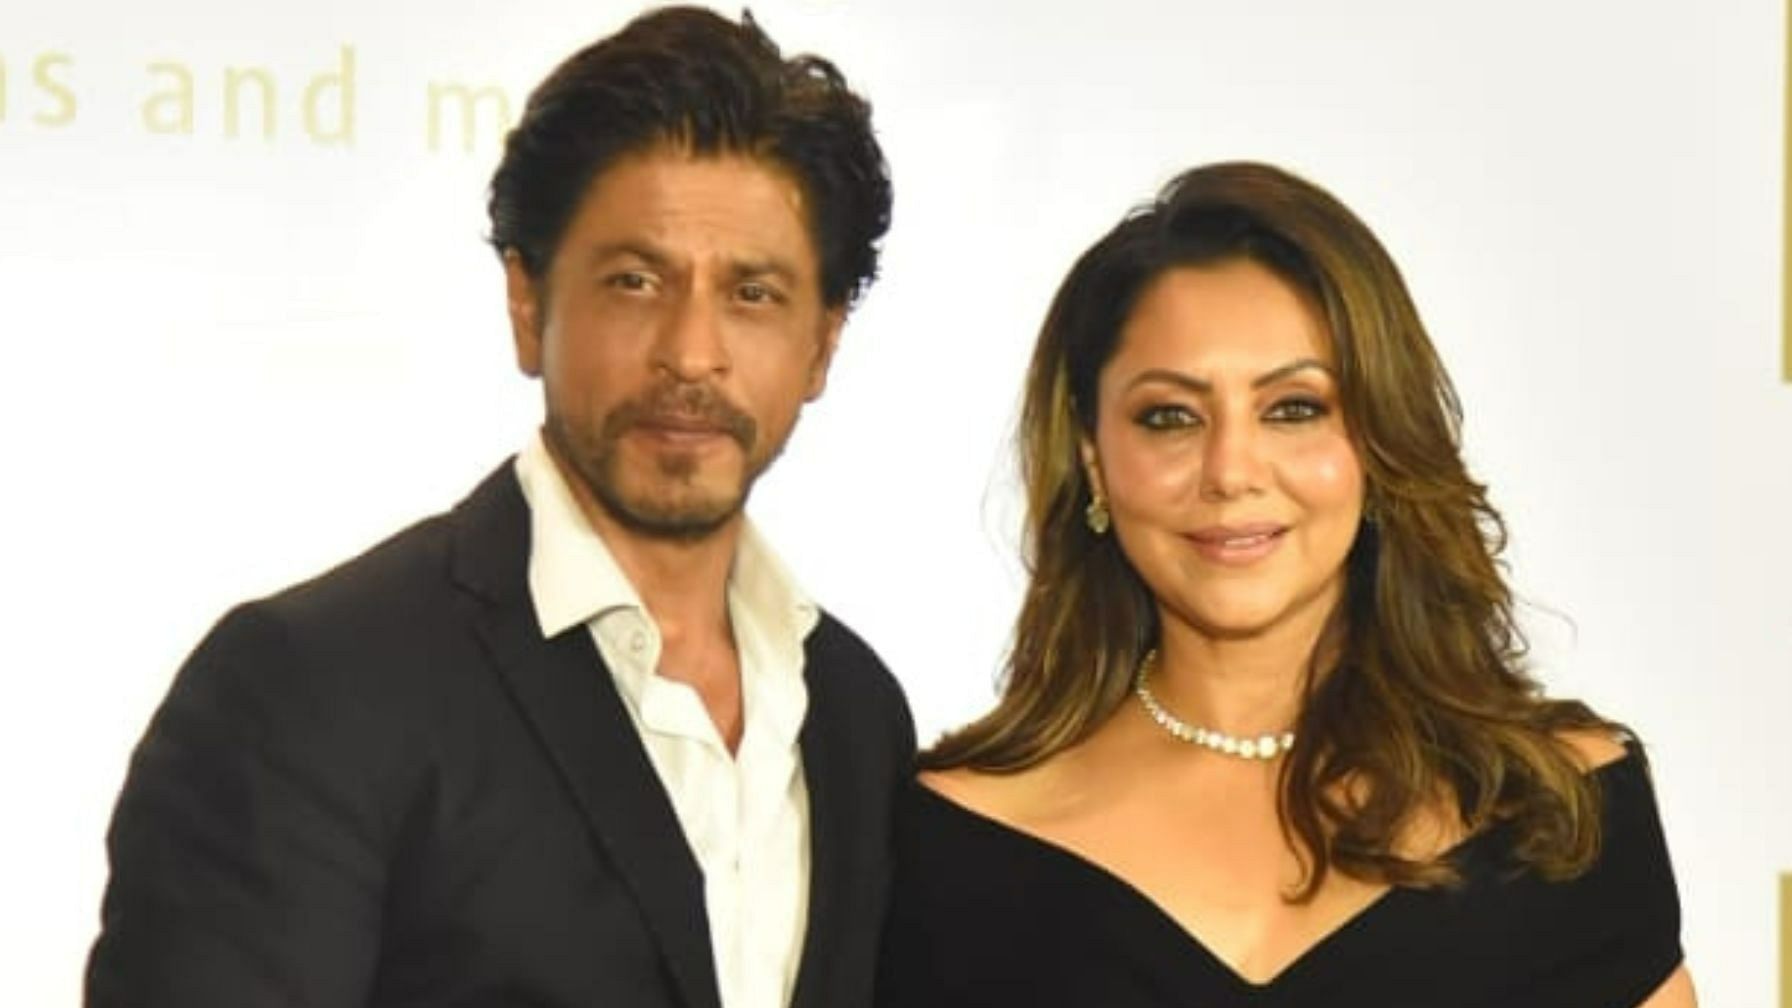 Top 5 Quotes By Shah Rukh Khan At Wife Gauri Khans Book Launch 